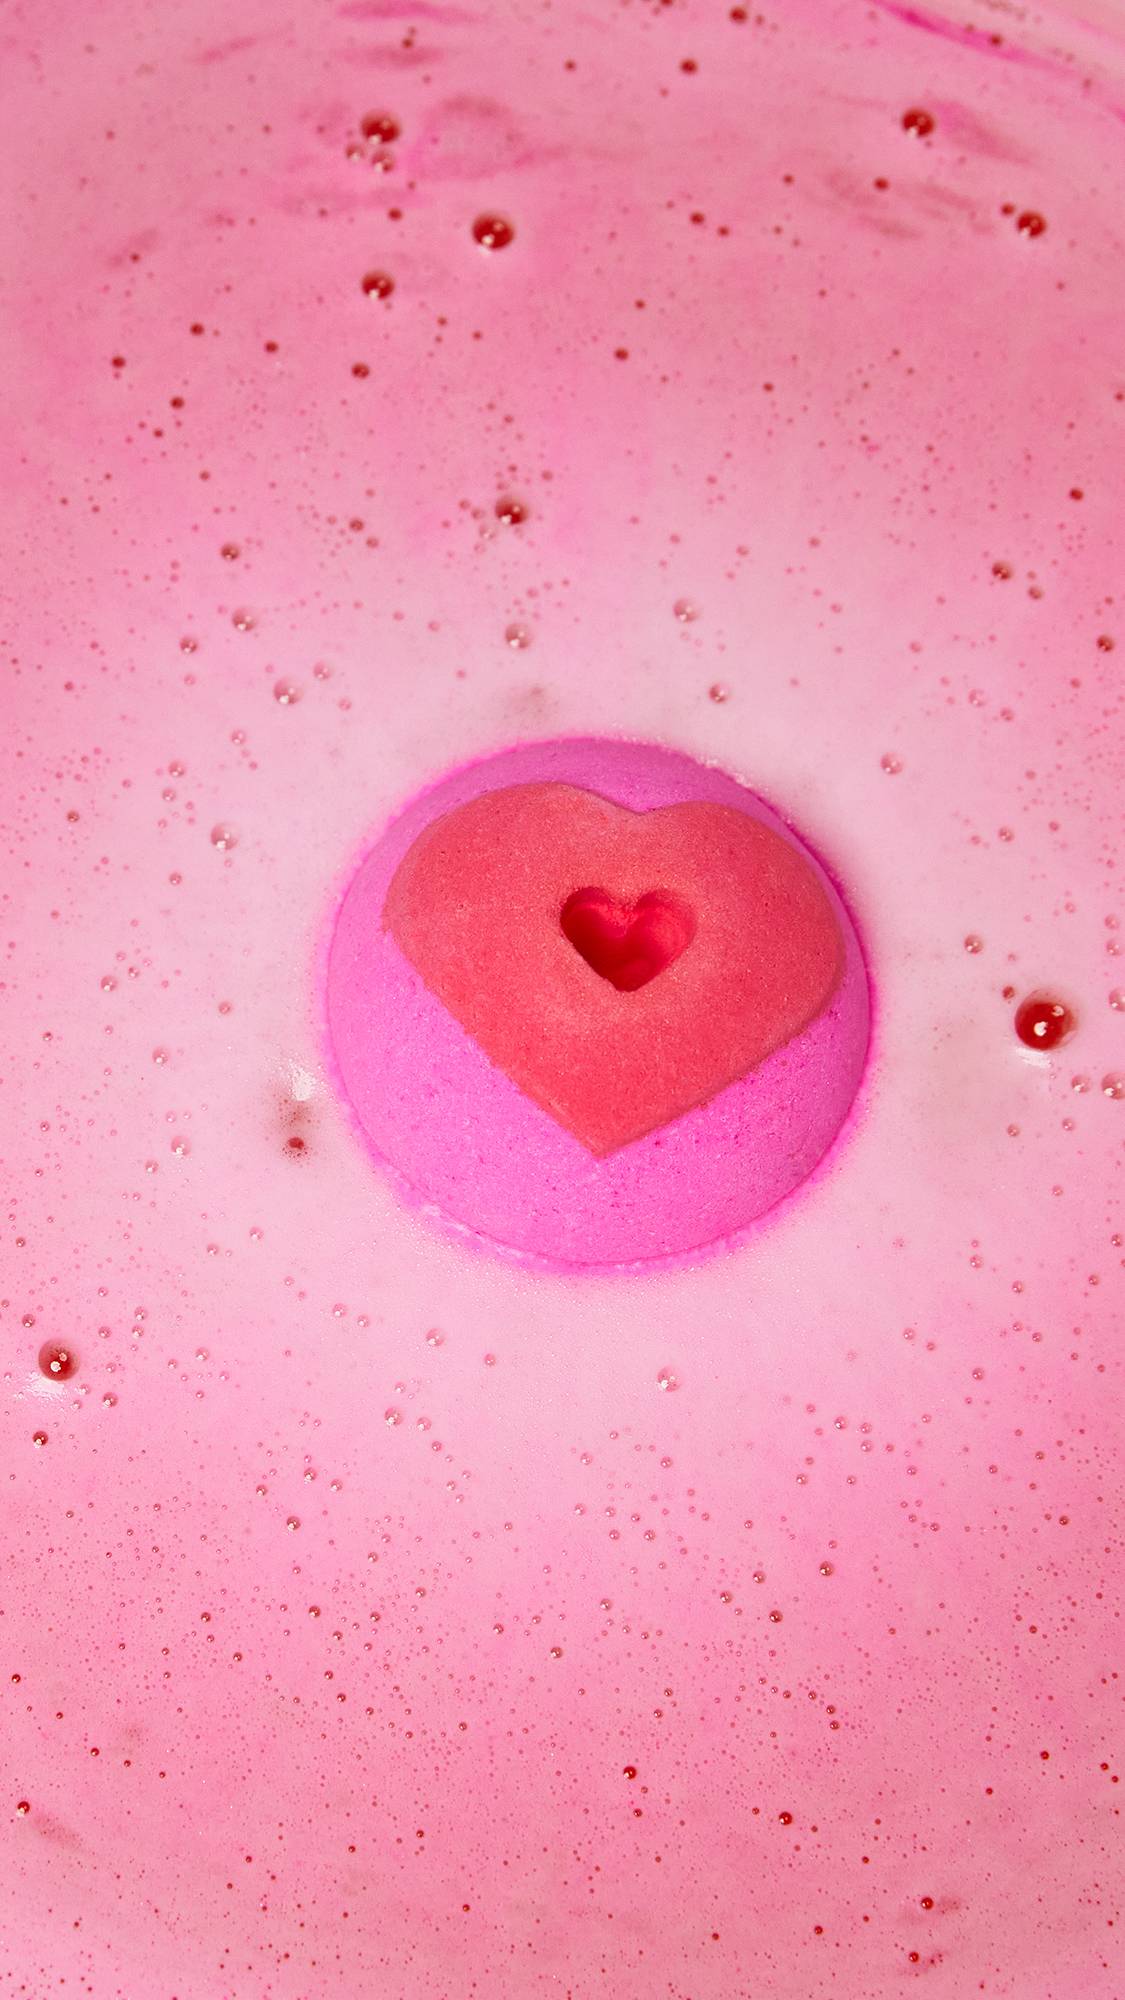 The Whispering Heart bath bomb sits on the water with the heart and hole on top as it is surrounded by thick, pink, foamy bubbles.